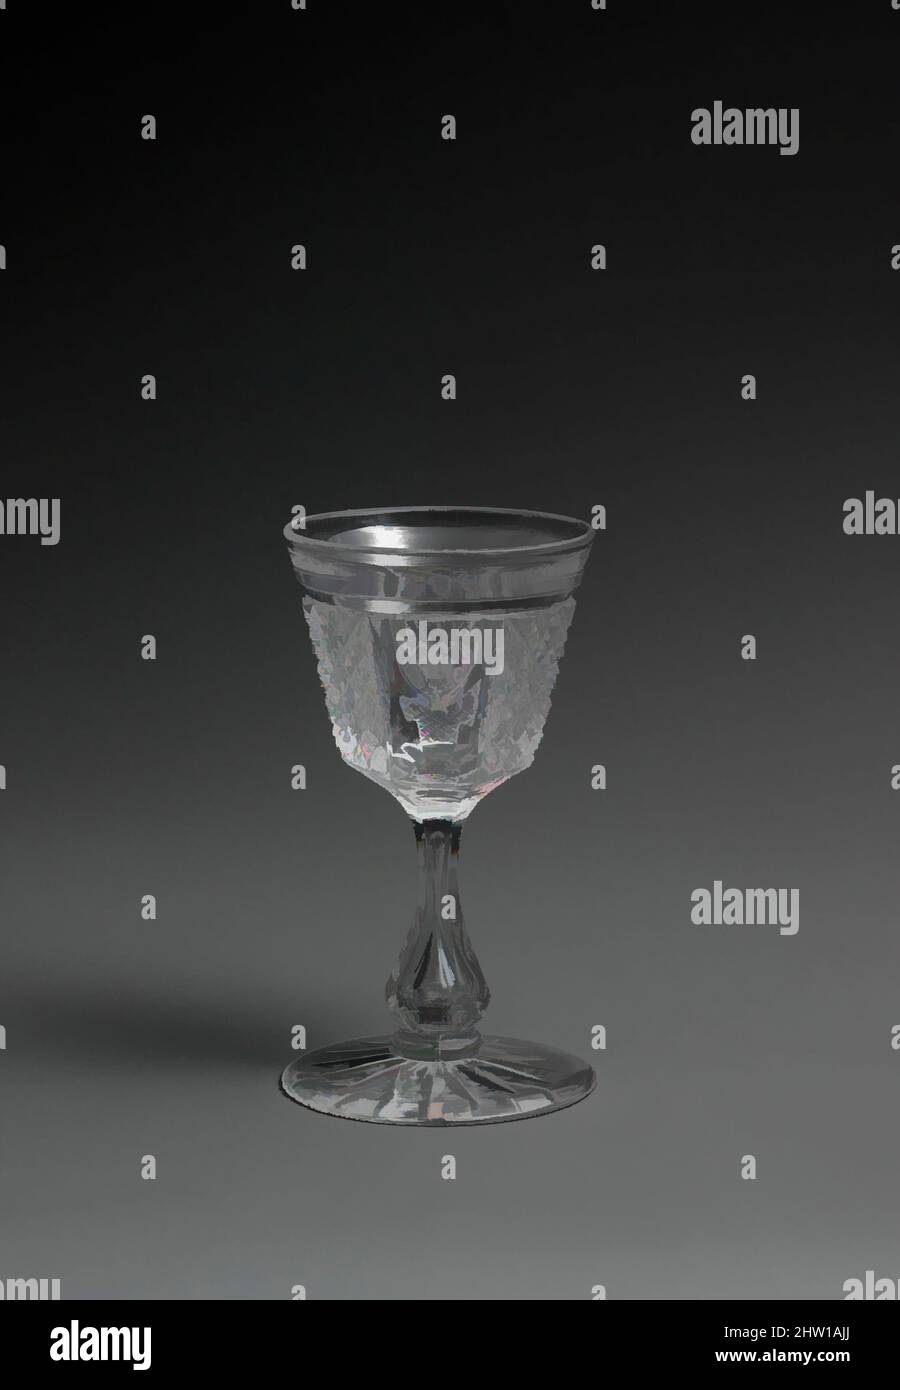 https://c8.alamy.com/comp/2HW1AJJ/art-inspired-by-small-drinking-vessel-ca-1855-made-in-new-york-new-york-united-states-american-glass-4-34-in-121-cm-glass-this-drinking-glass-is-one-of-three-graduated-sizes-of-glasses-made-for-a-large-luxury-table-service-classic-works-modernized-by-artotop-with-a-splash-of-modernity-shapes-color-and-value-eye-catching-visual-impact-on-art-emotions-through-freedom-of-artworks-in-a-contemporary-way-a-timeless-message-pursuing-a-wildly-creative-new-direction-artists-turning-to-the-digital-medium-and-creating-the-artotop-nft-2HW1AJJ.jpg